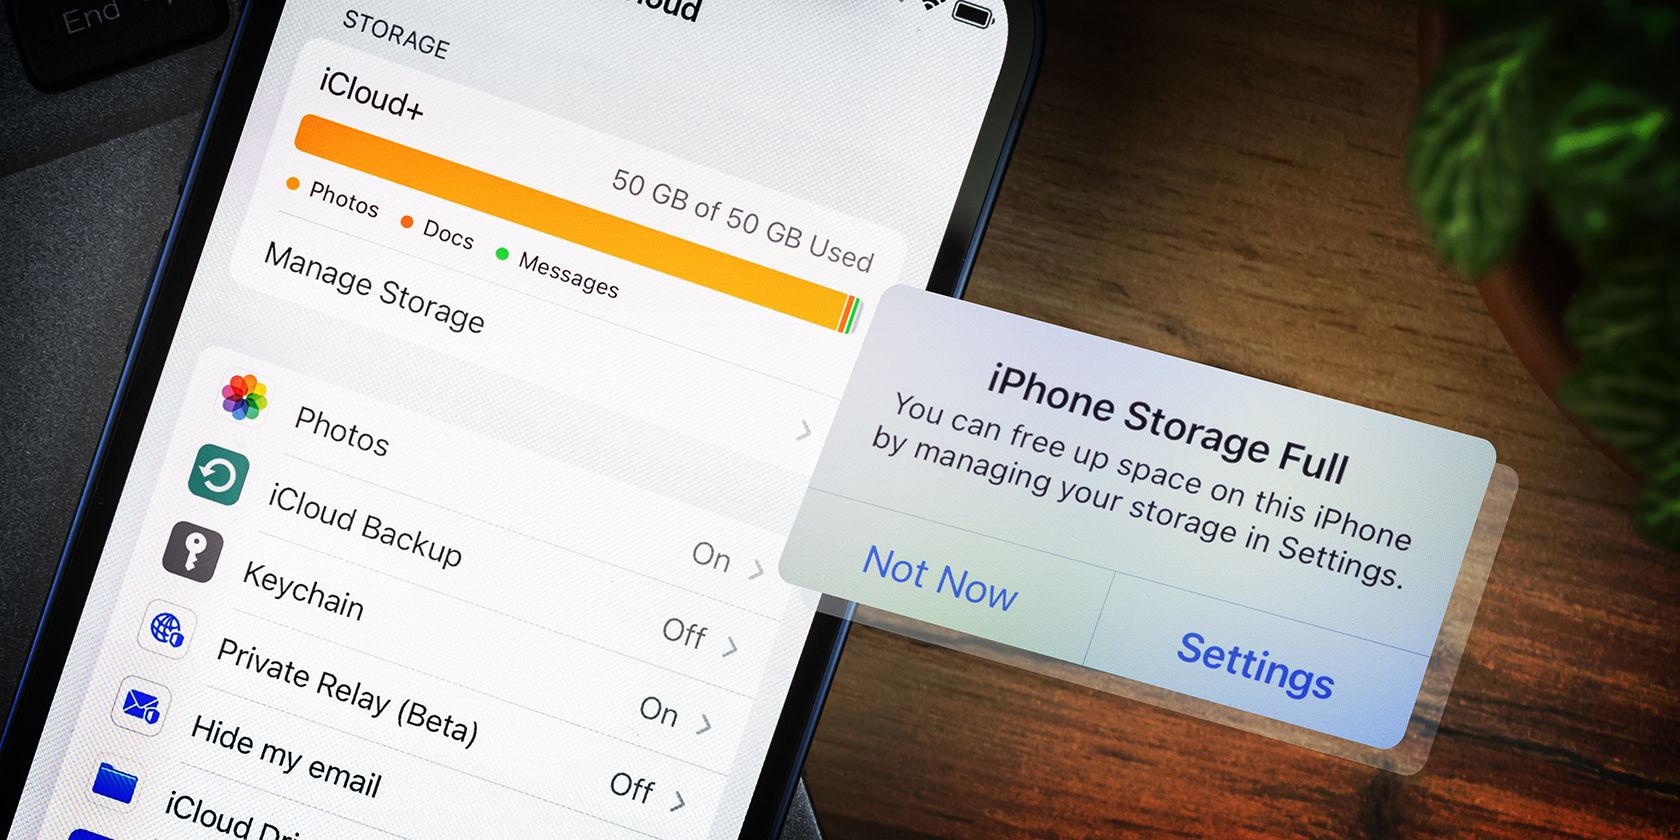 An iPhone displays a full storage warning and the iCloud storage settings, indicating that the device's capacity has been reached.